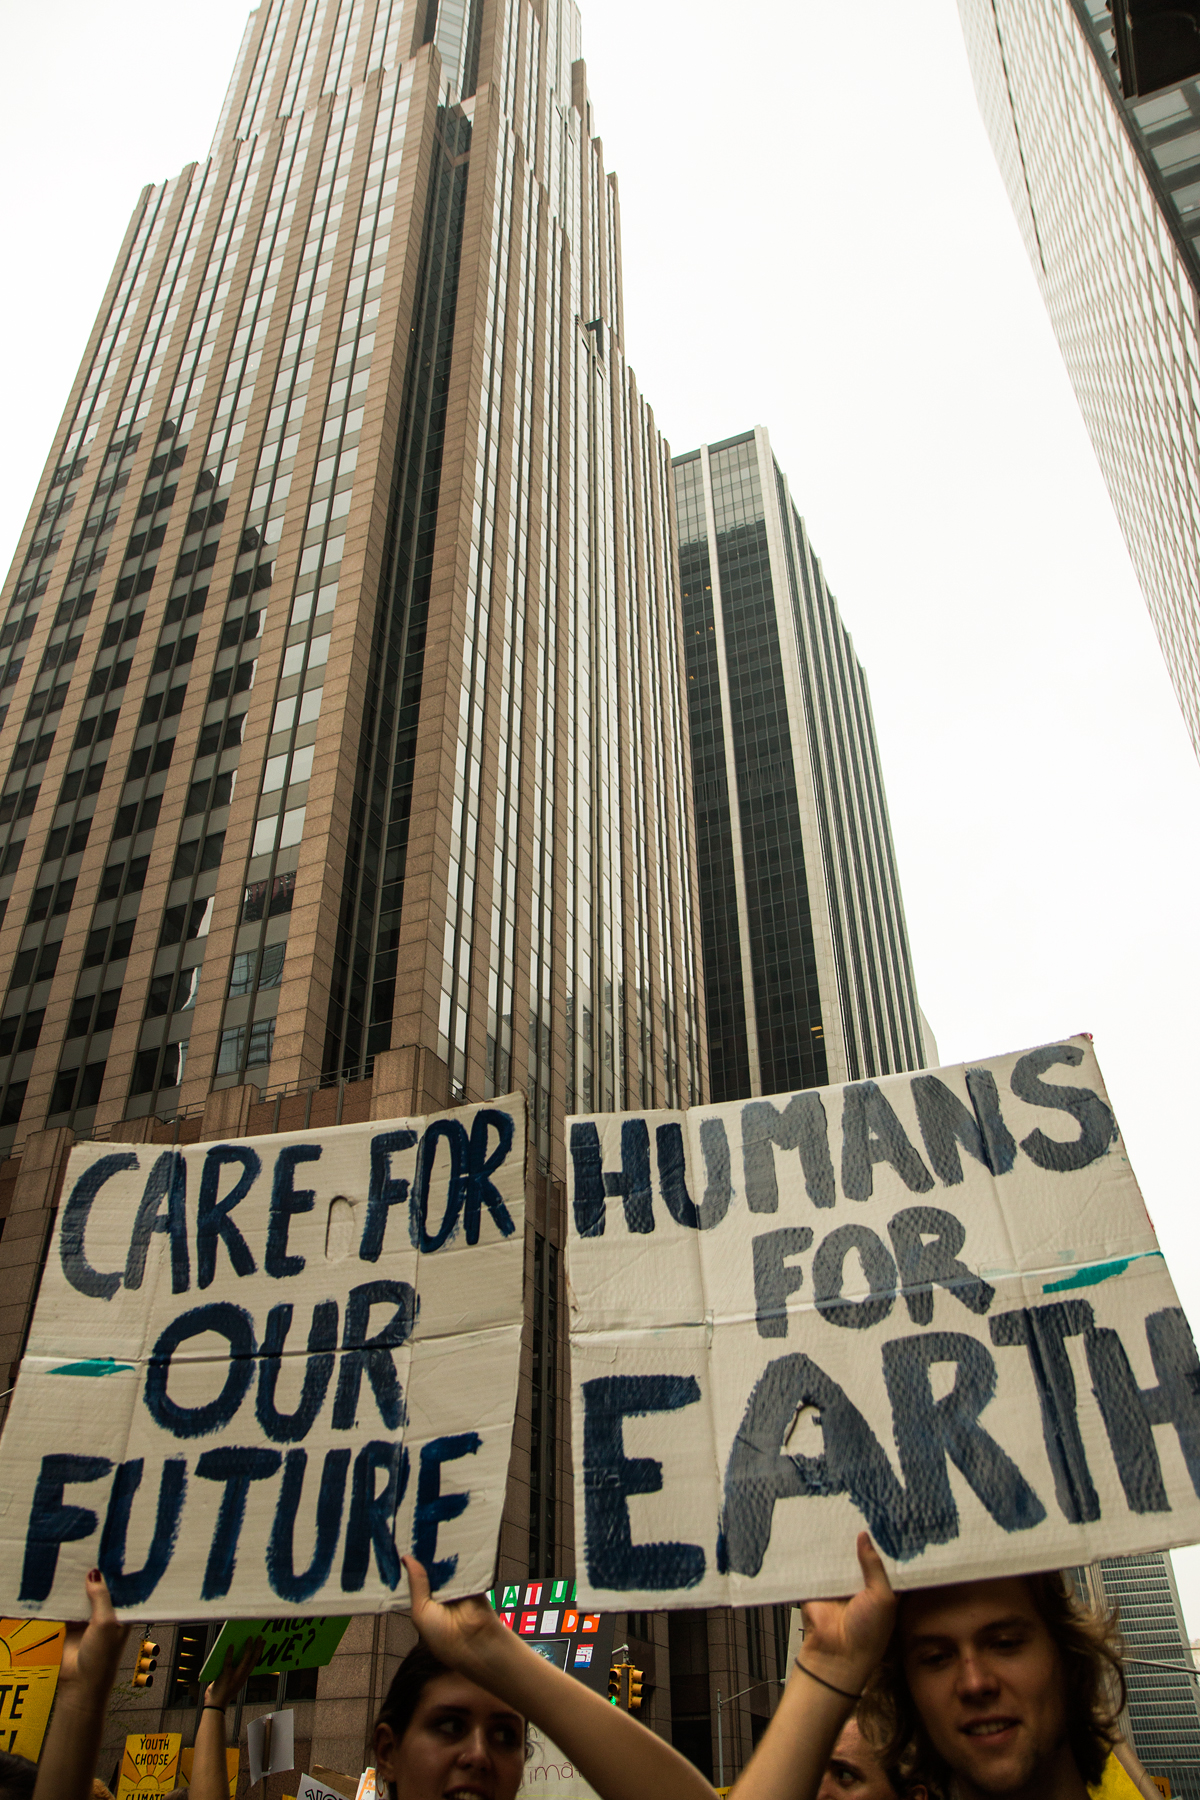 Images from the Peoples Climate March, September 2014. Photo by Savanna Lenker